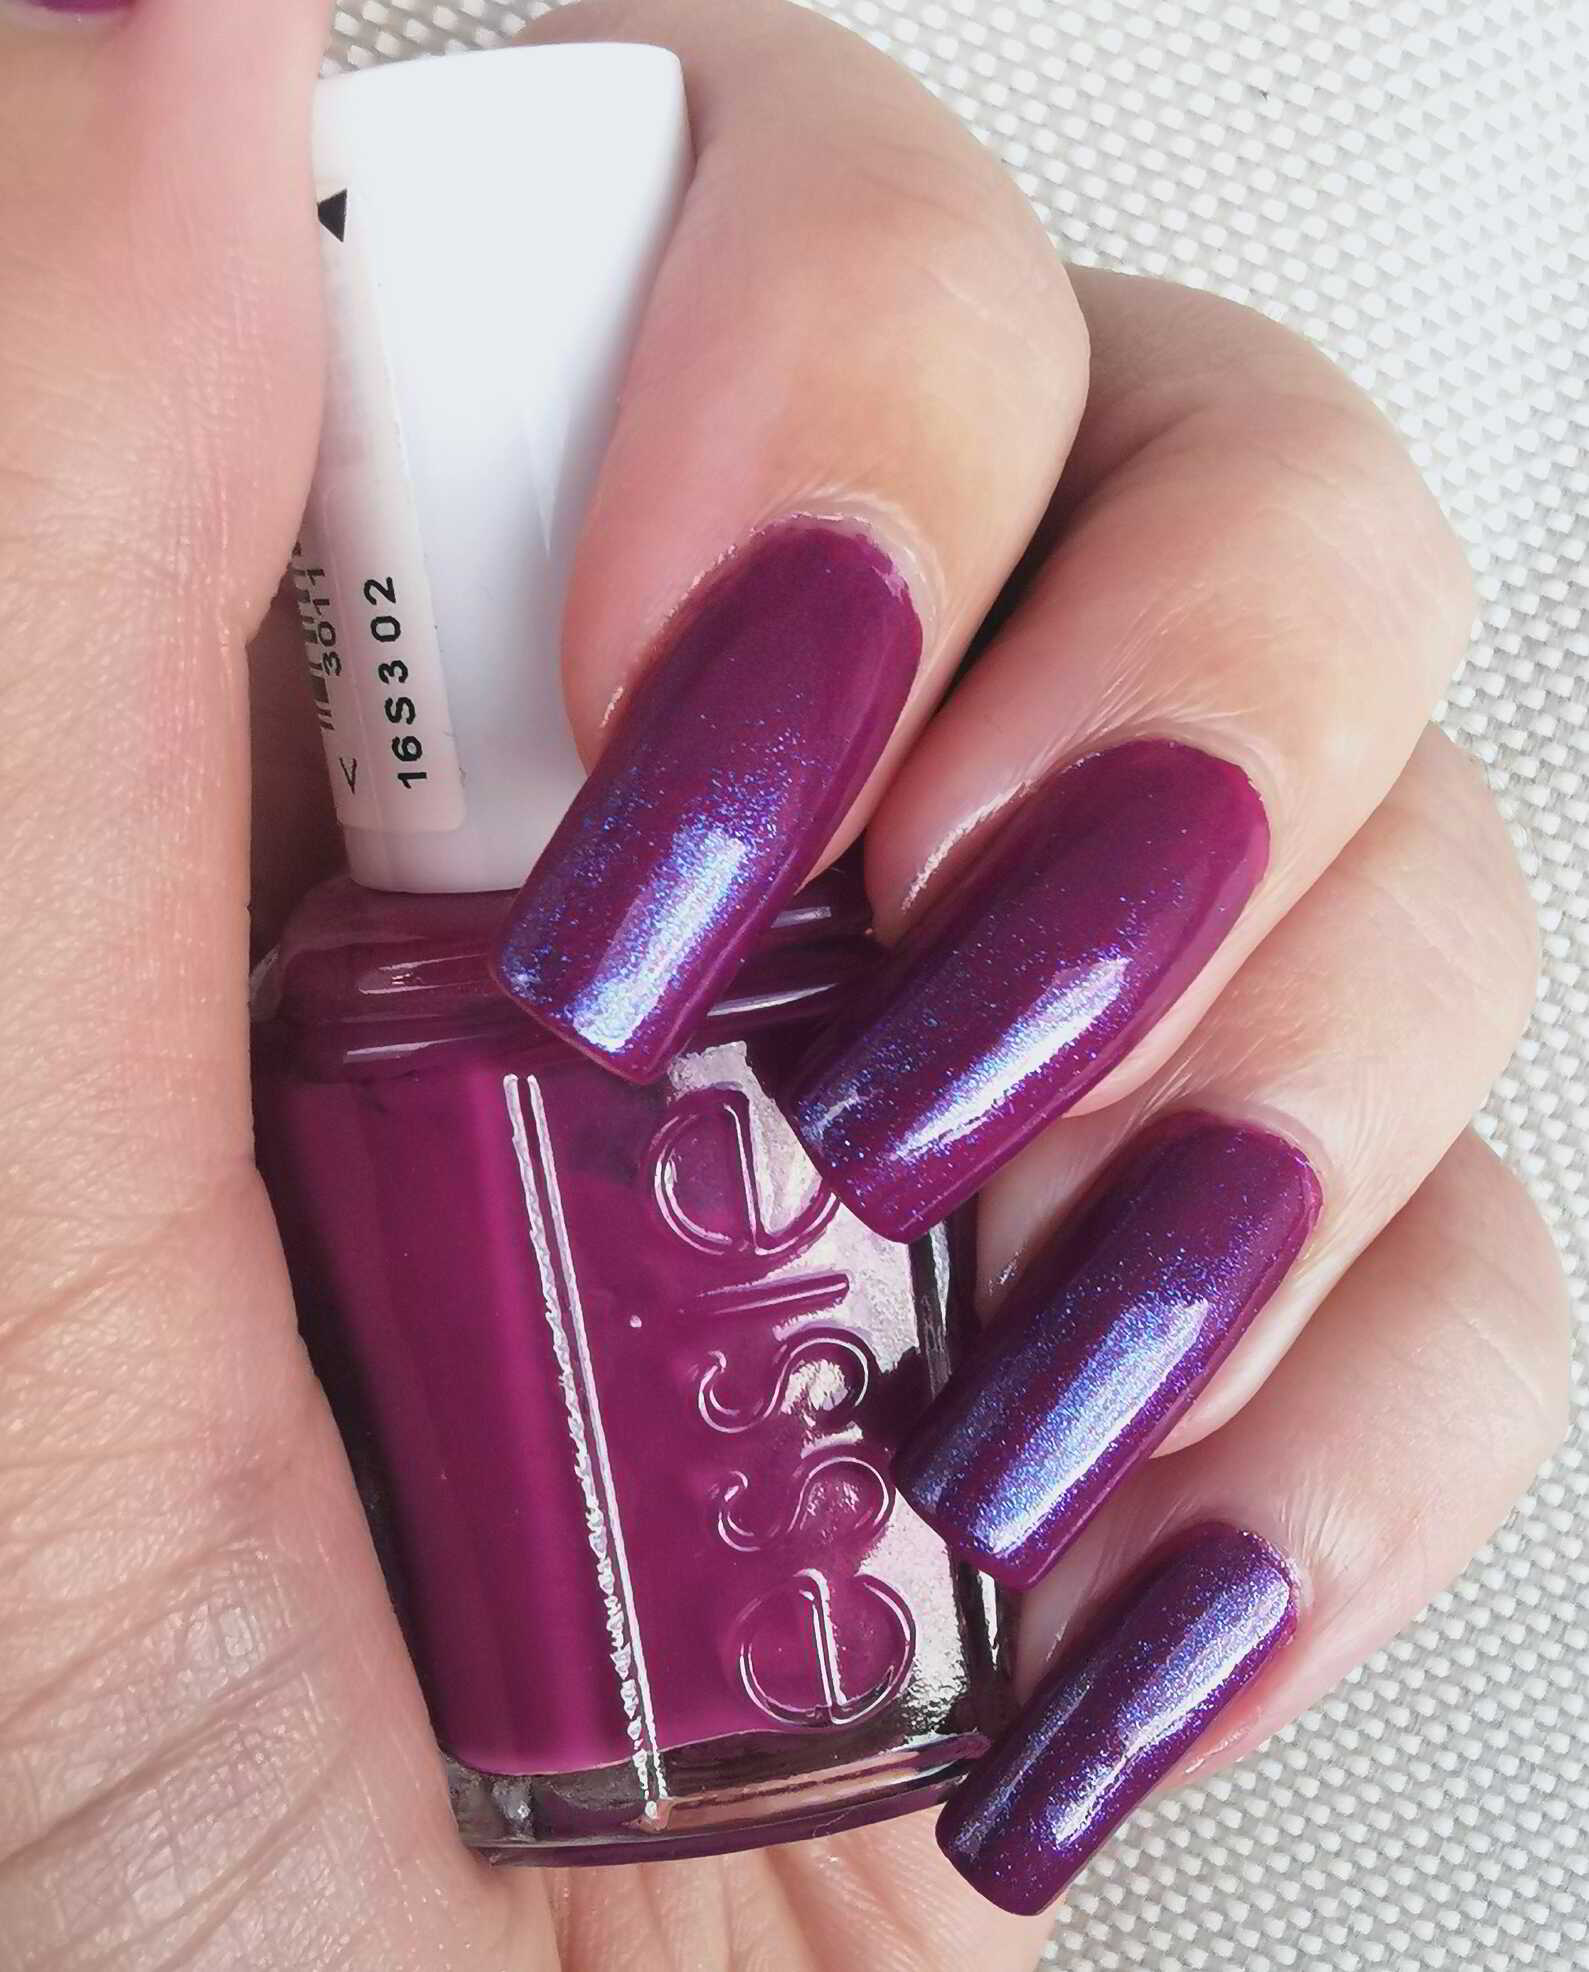 Nail polish manicure of shade essie Flowerista, Catrice Feel The Cosmic Vibe